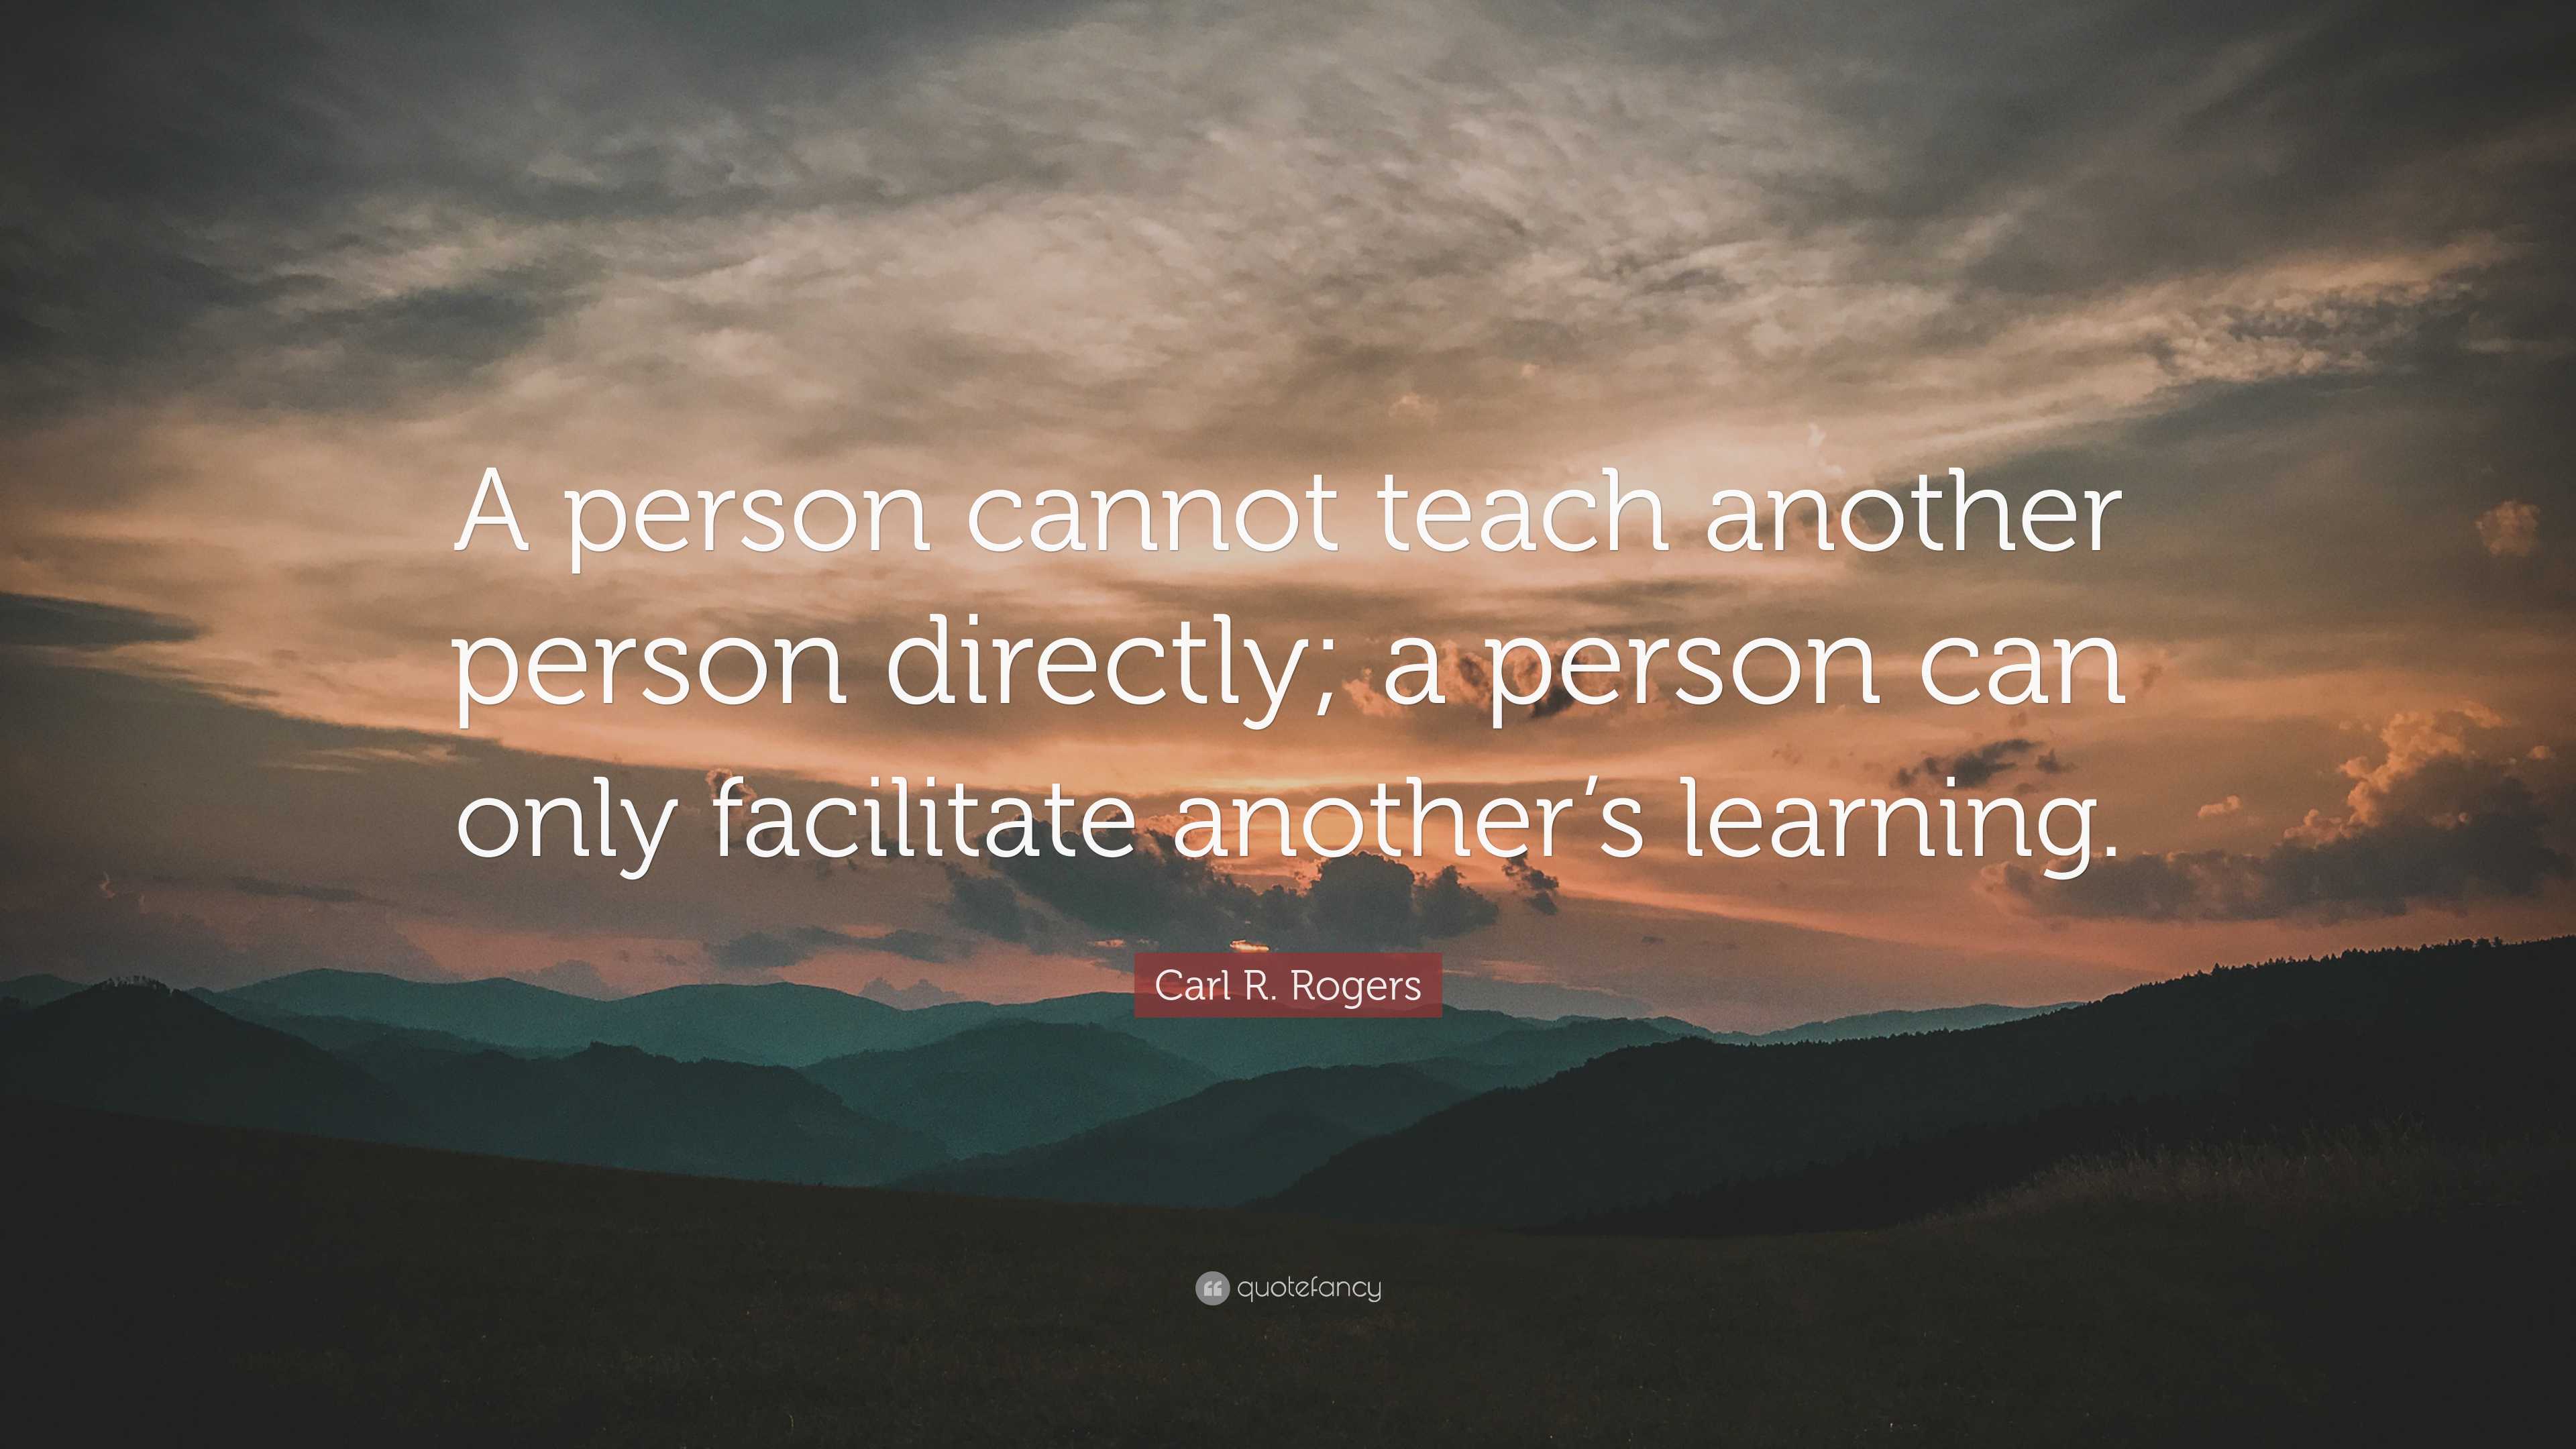 A person cannot teach another person directly; a person can only facilitate  another's learning.